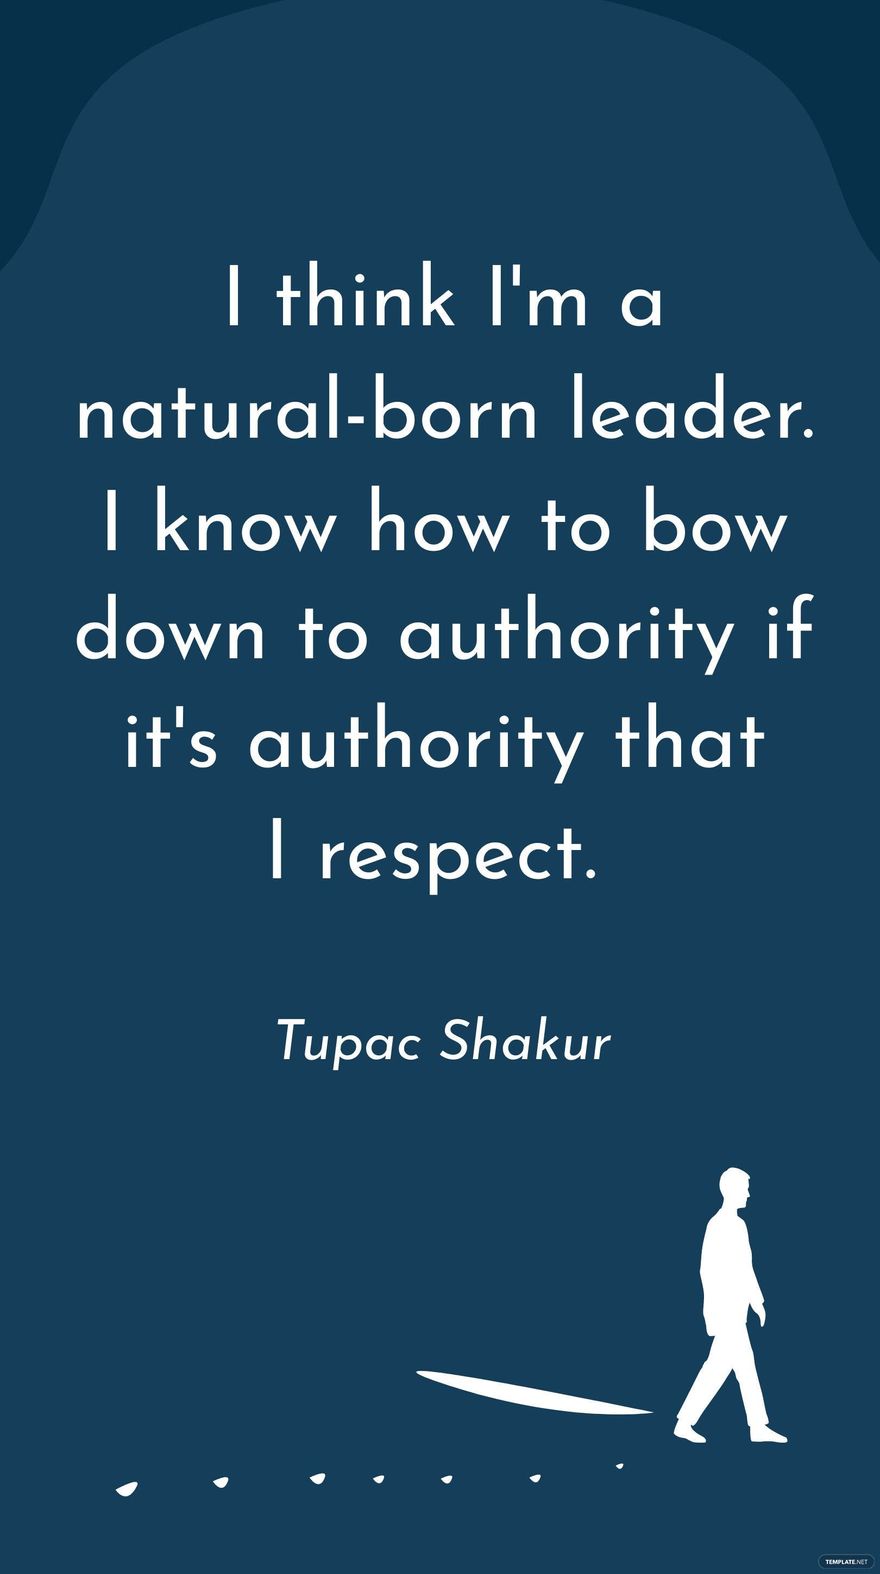 Tupac Shakur - I think I'm a natural-born leader. I know how to bow down to authority if it's authority that I respect. in JPG